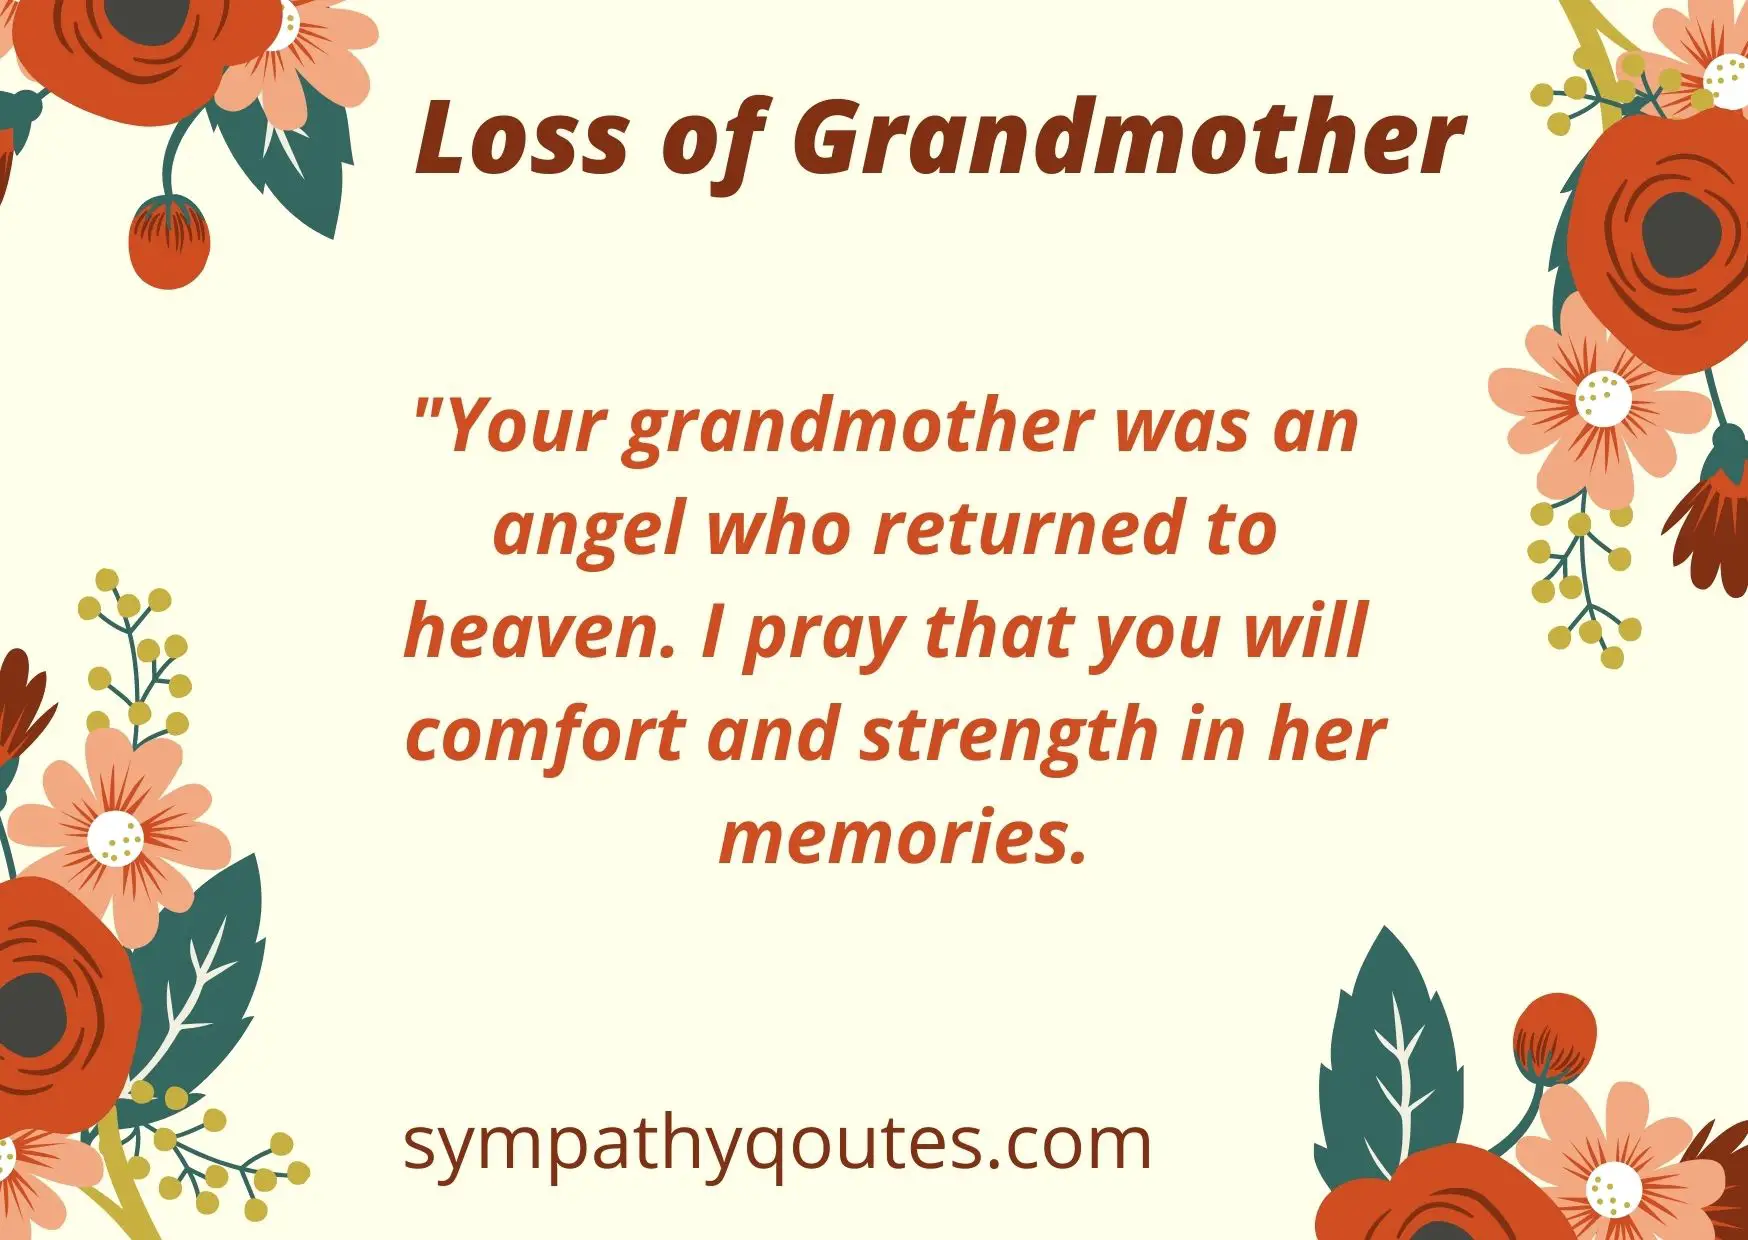  Condolence Messages for Loss of Grandmother